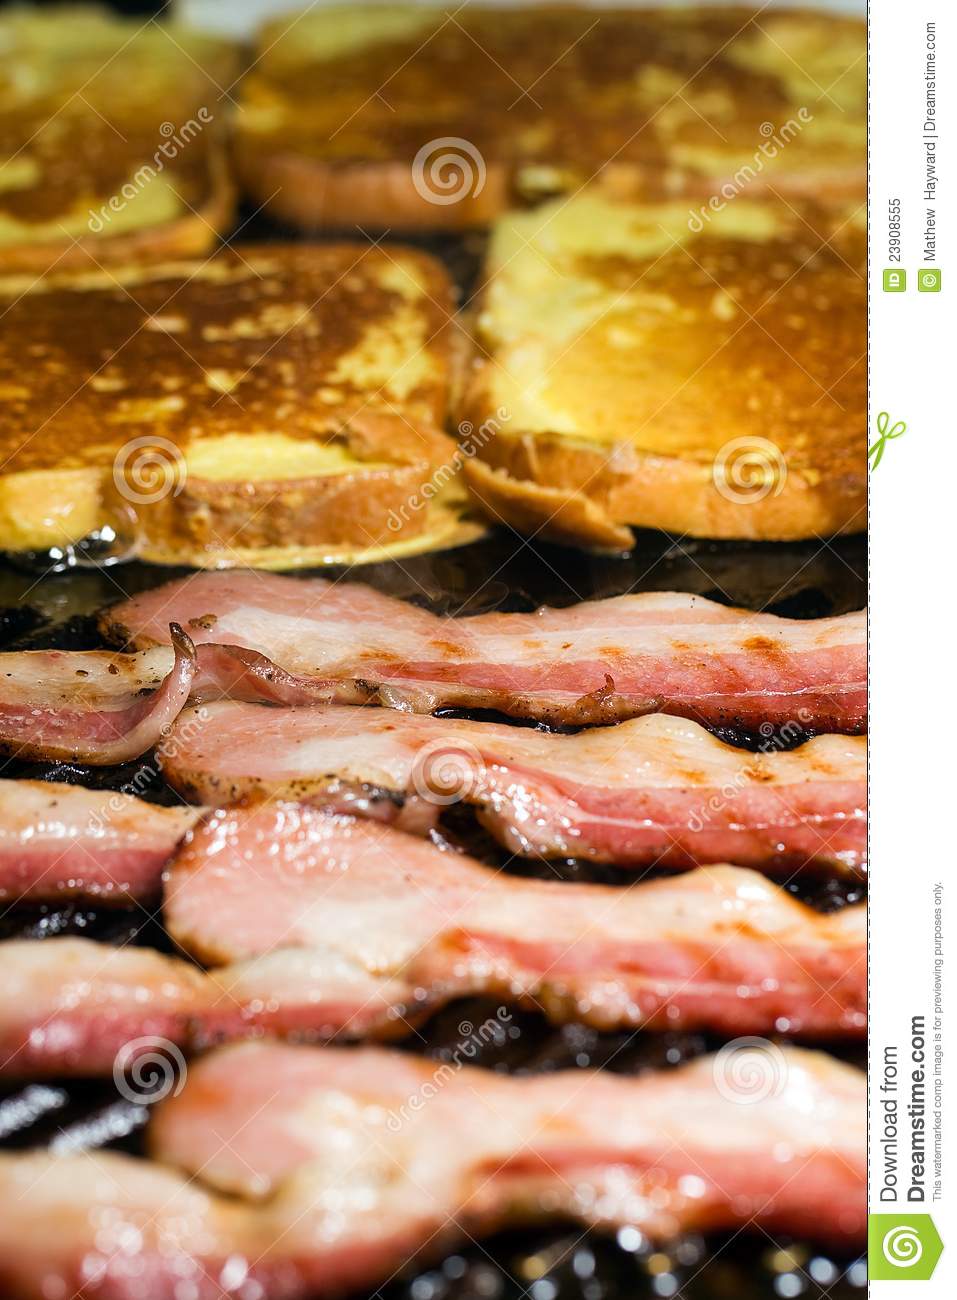 Sizzling Bacon And French Toast Royalty Free Stock Photo   Image    